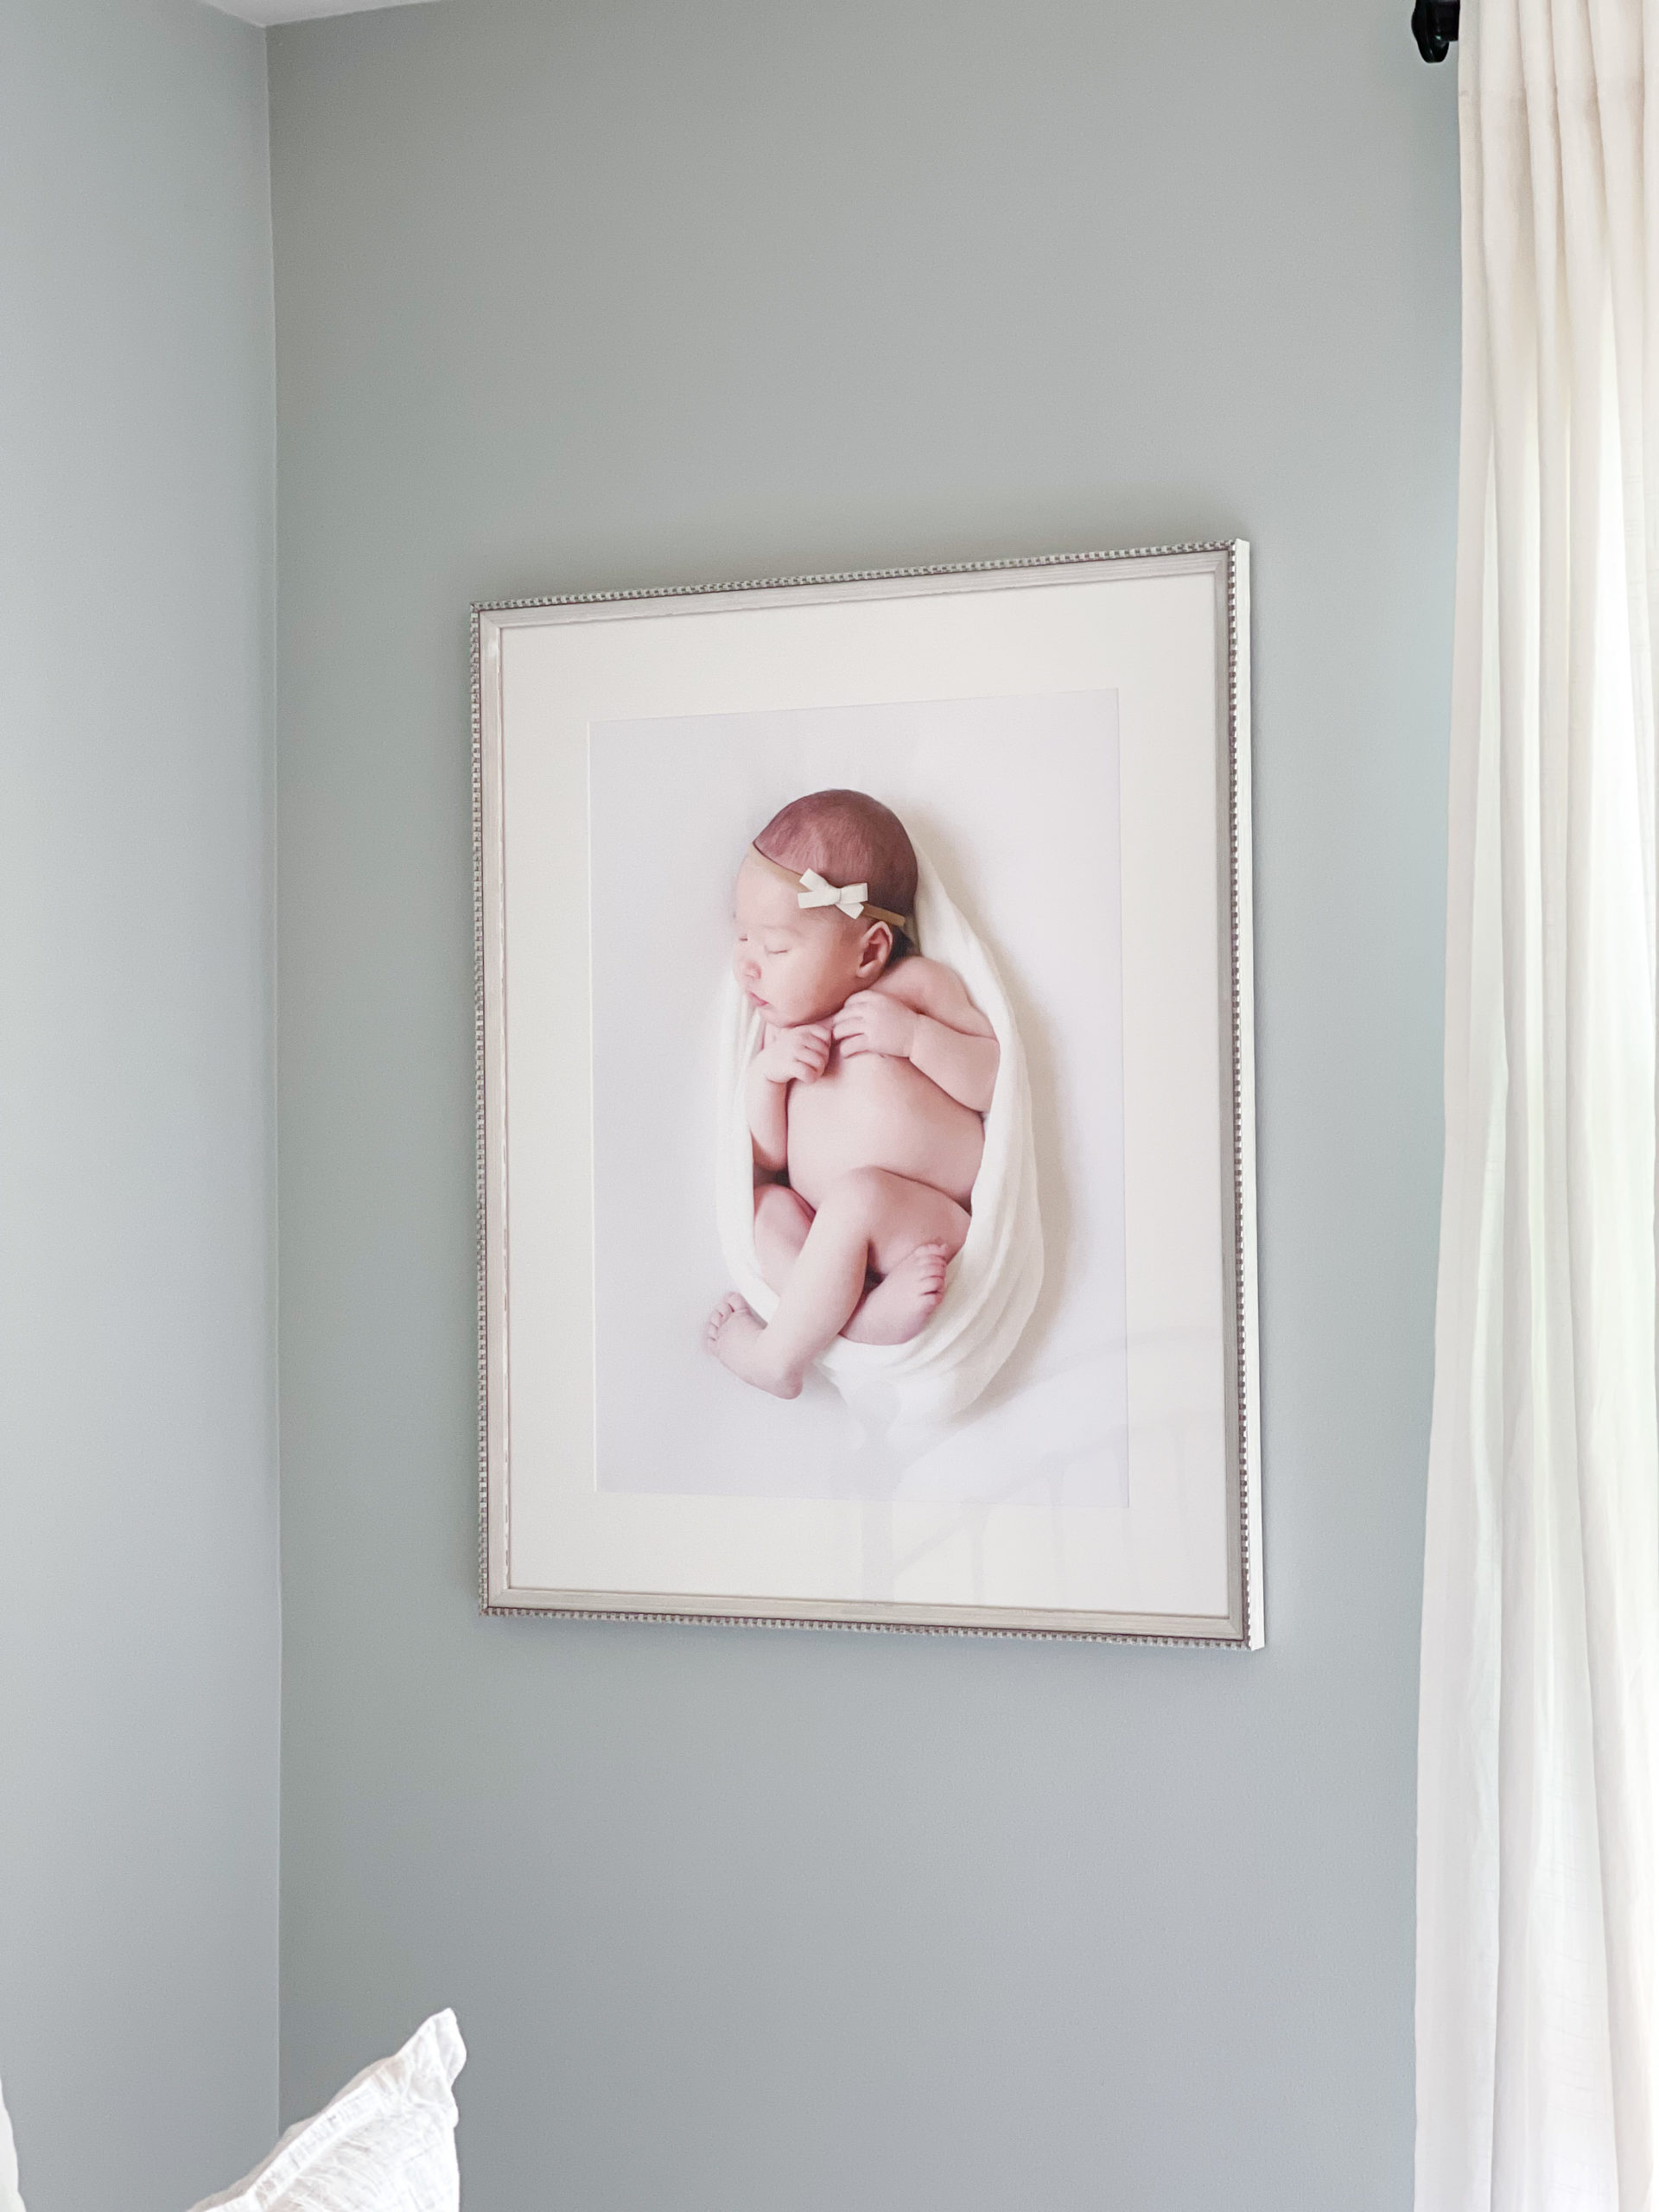 Image of a newborn baby framed on the wall | Photo by Anna Wisjo Photography 